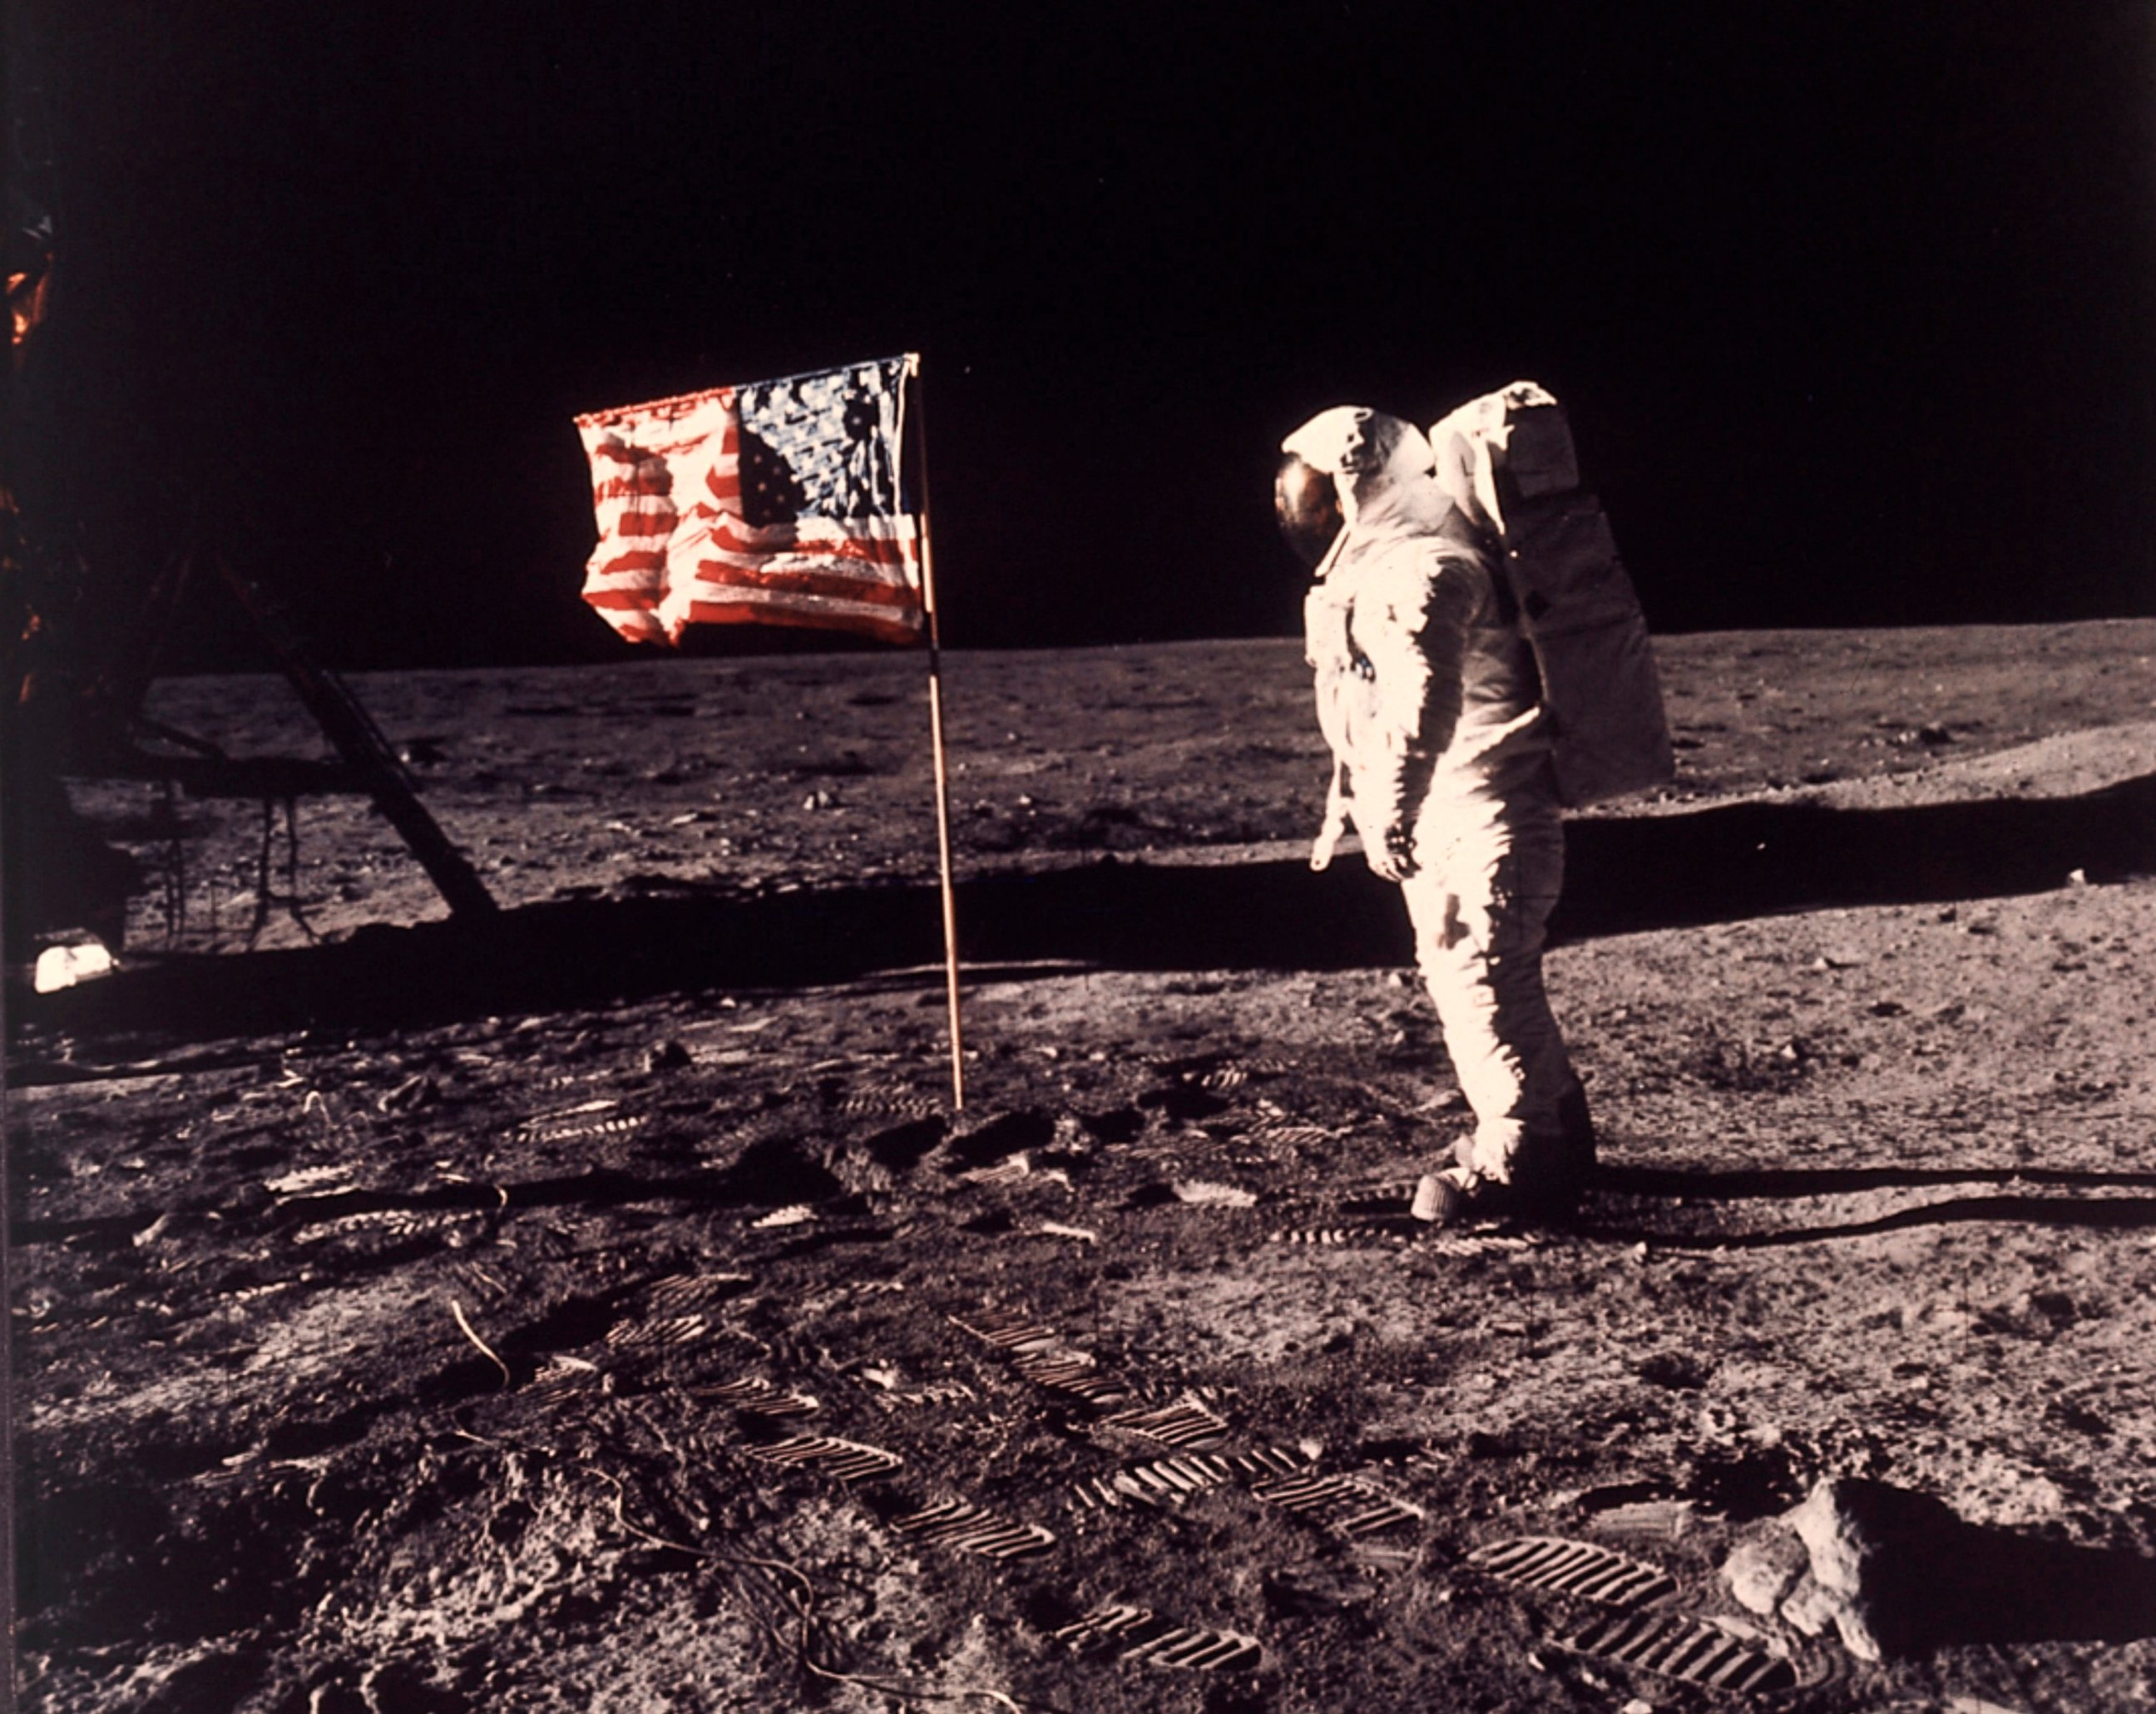 PHOTO: In this image provided by NASA, astronaut Buzz Aldrin poses for a photograph beside the U.S. flag deployed on the moon during the Apollo 11 mission on July 20, 1969. 